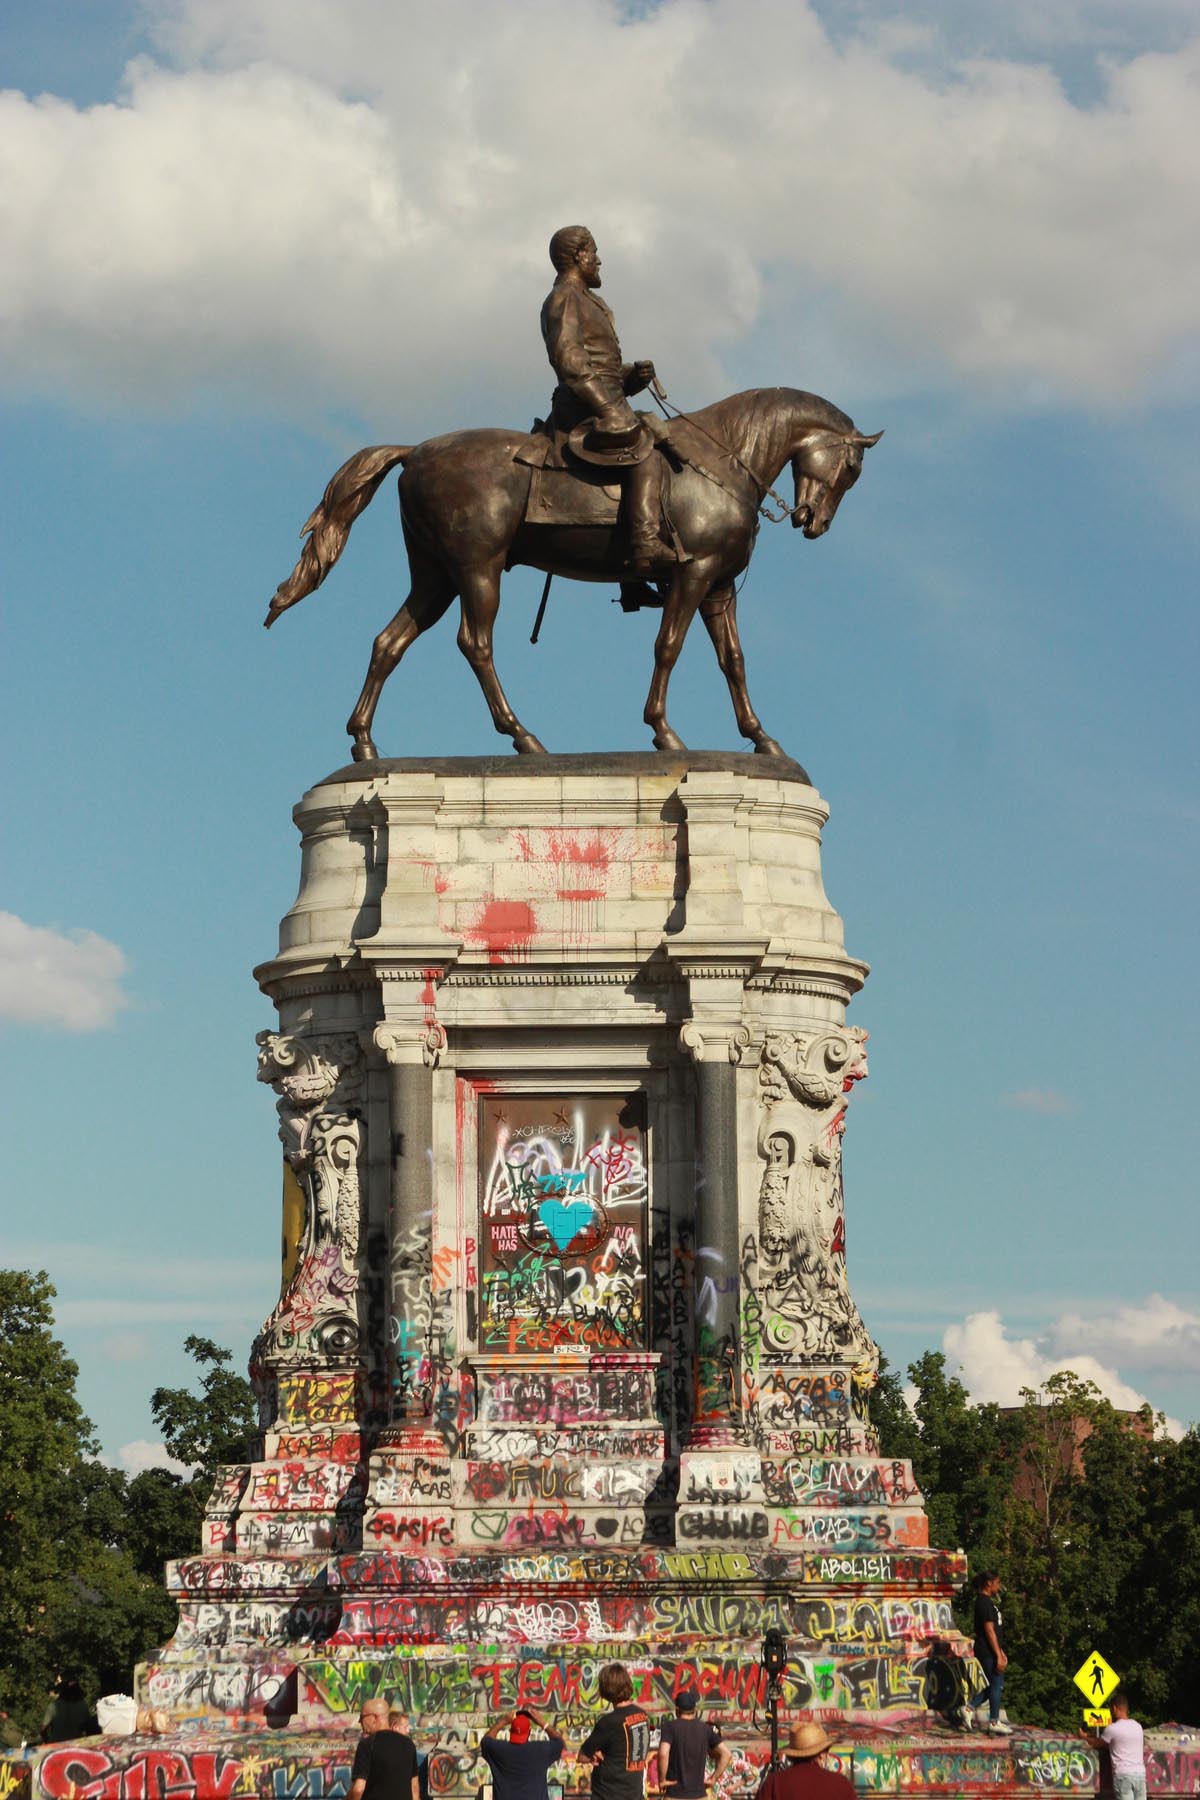 Destyni Kuhns-Gray took this photo of the graffiti-covered Robert E. Lee Monument.